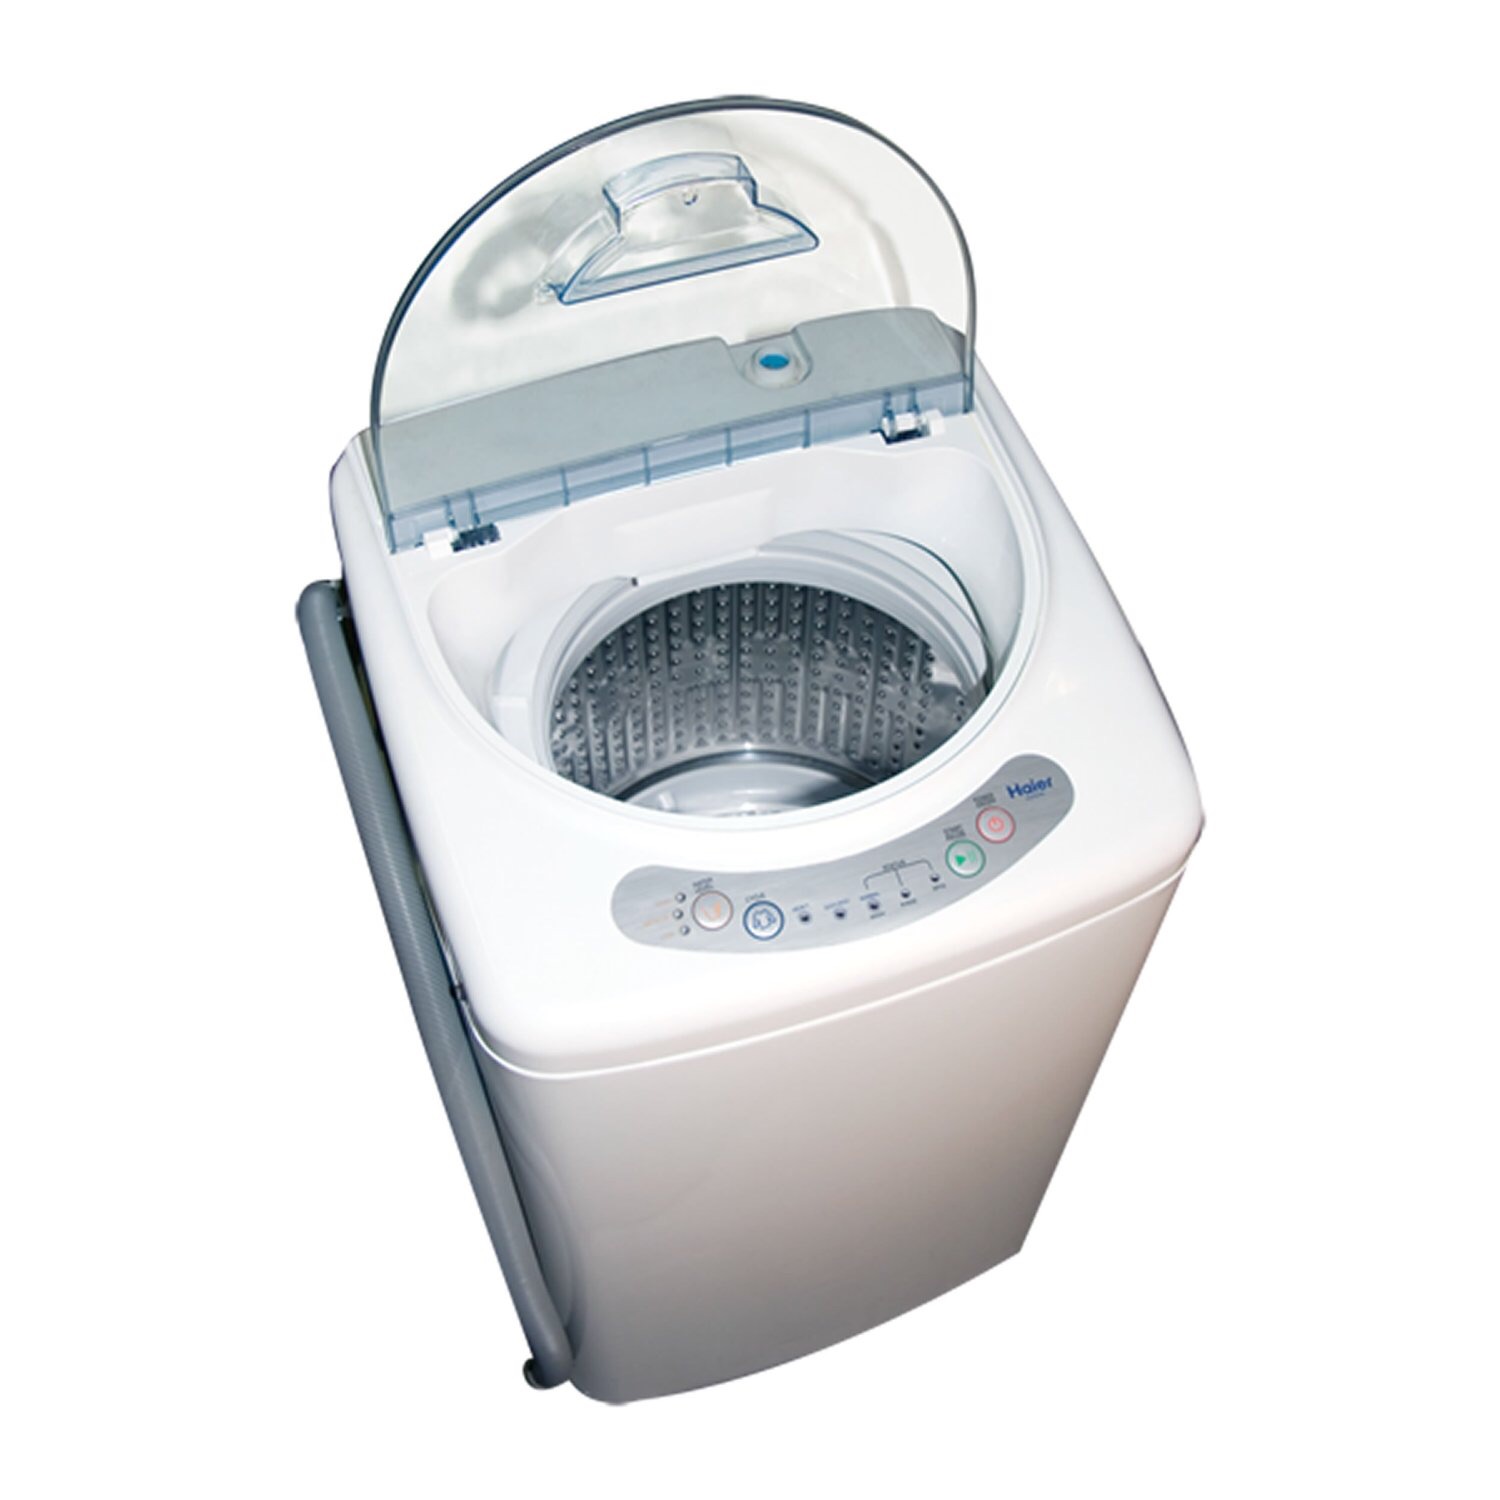 10 Best Portable Washers 2018 